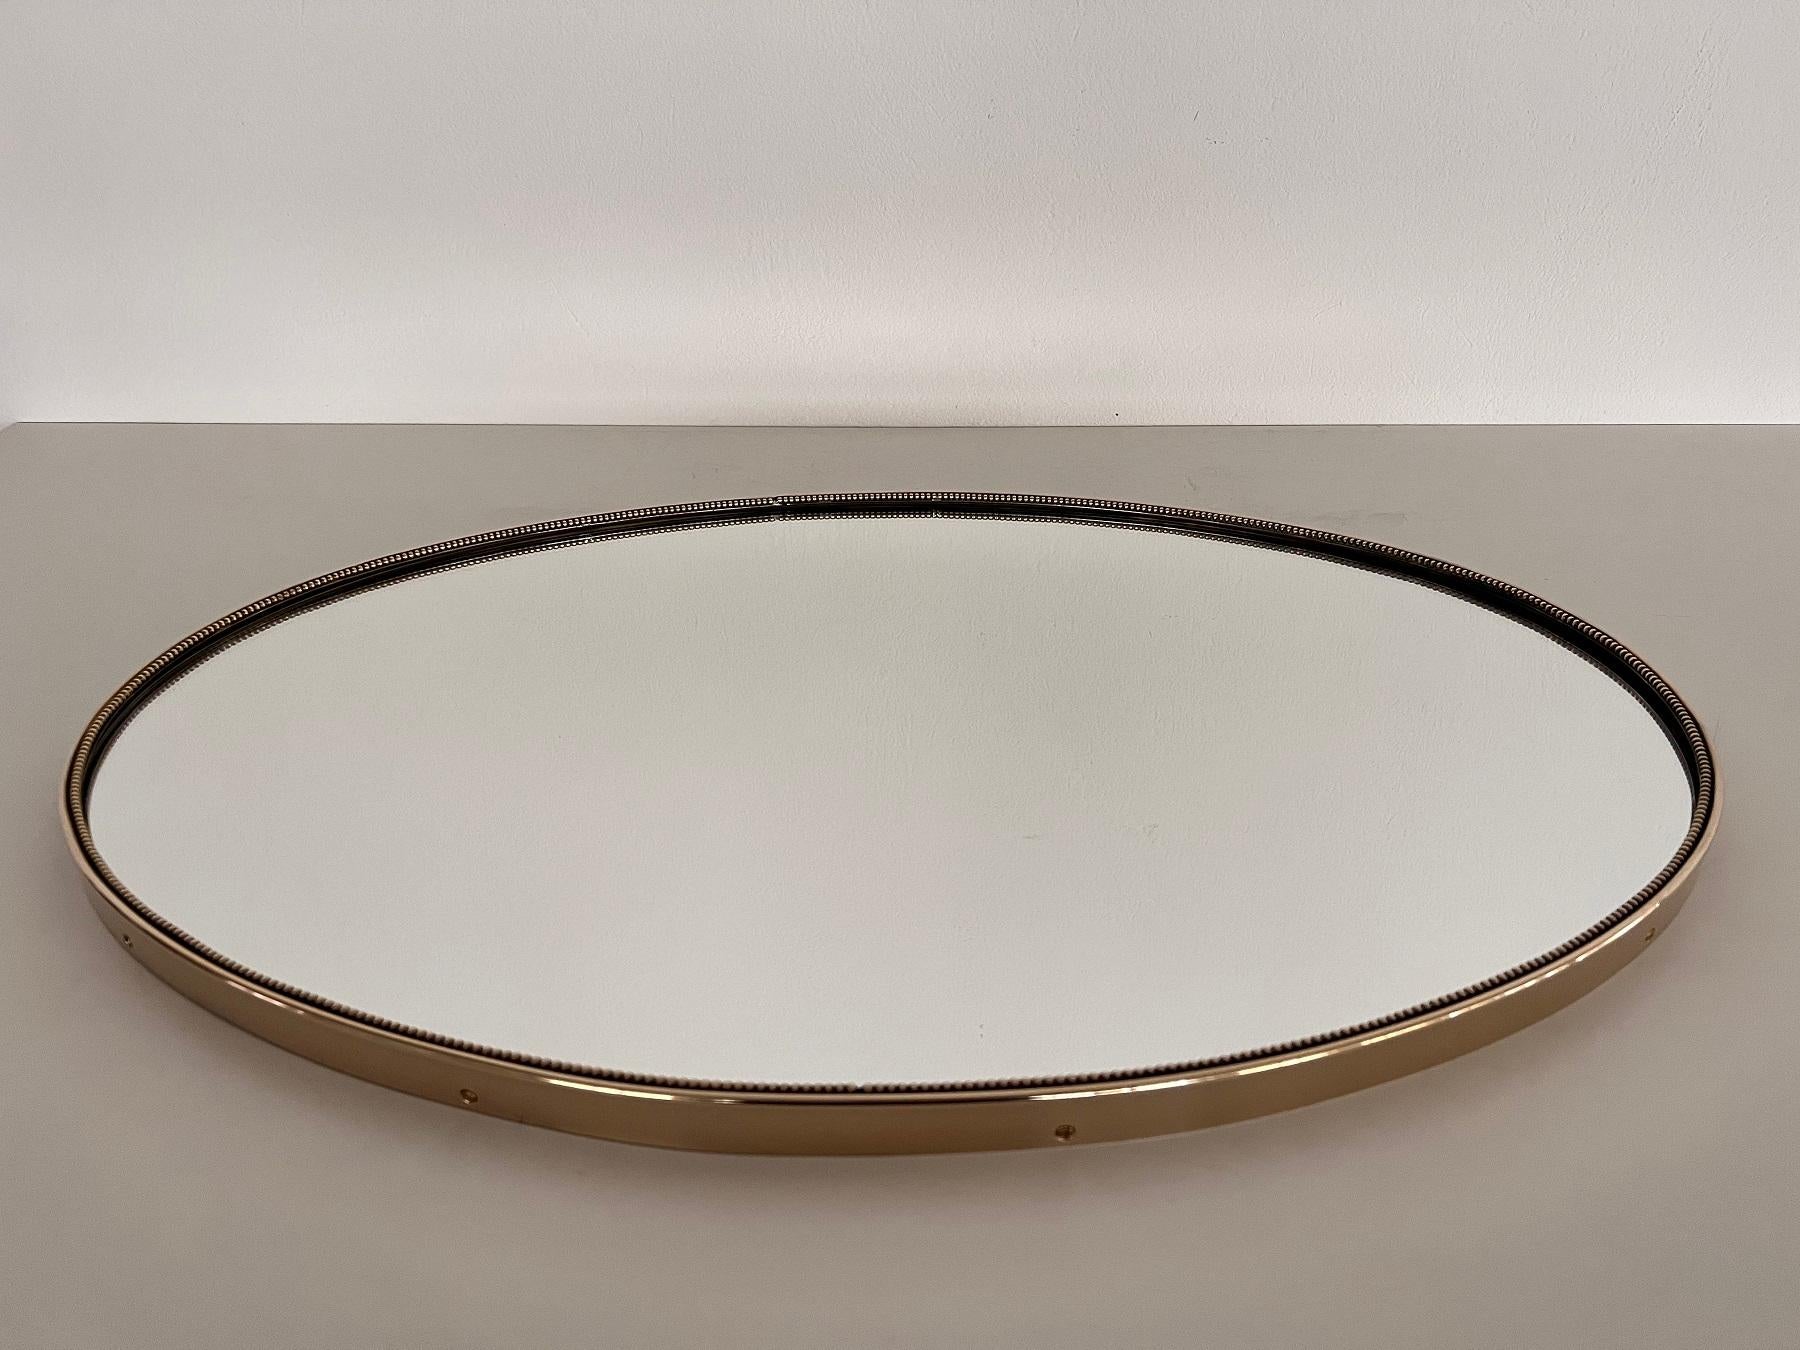 Italian Midcentury Vintage Wall Mirror with Brass Frame and Decor, 1970s For Sale 9